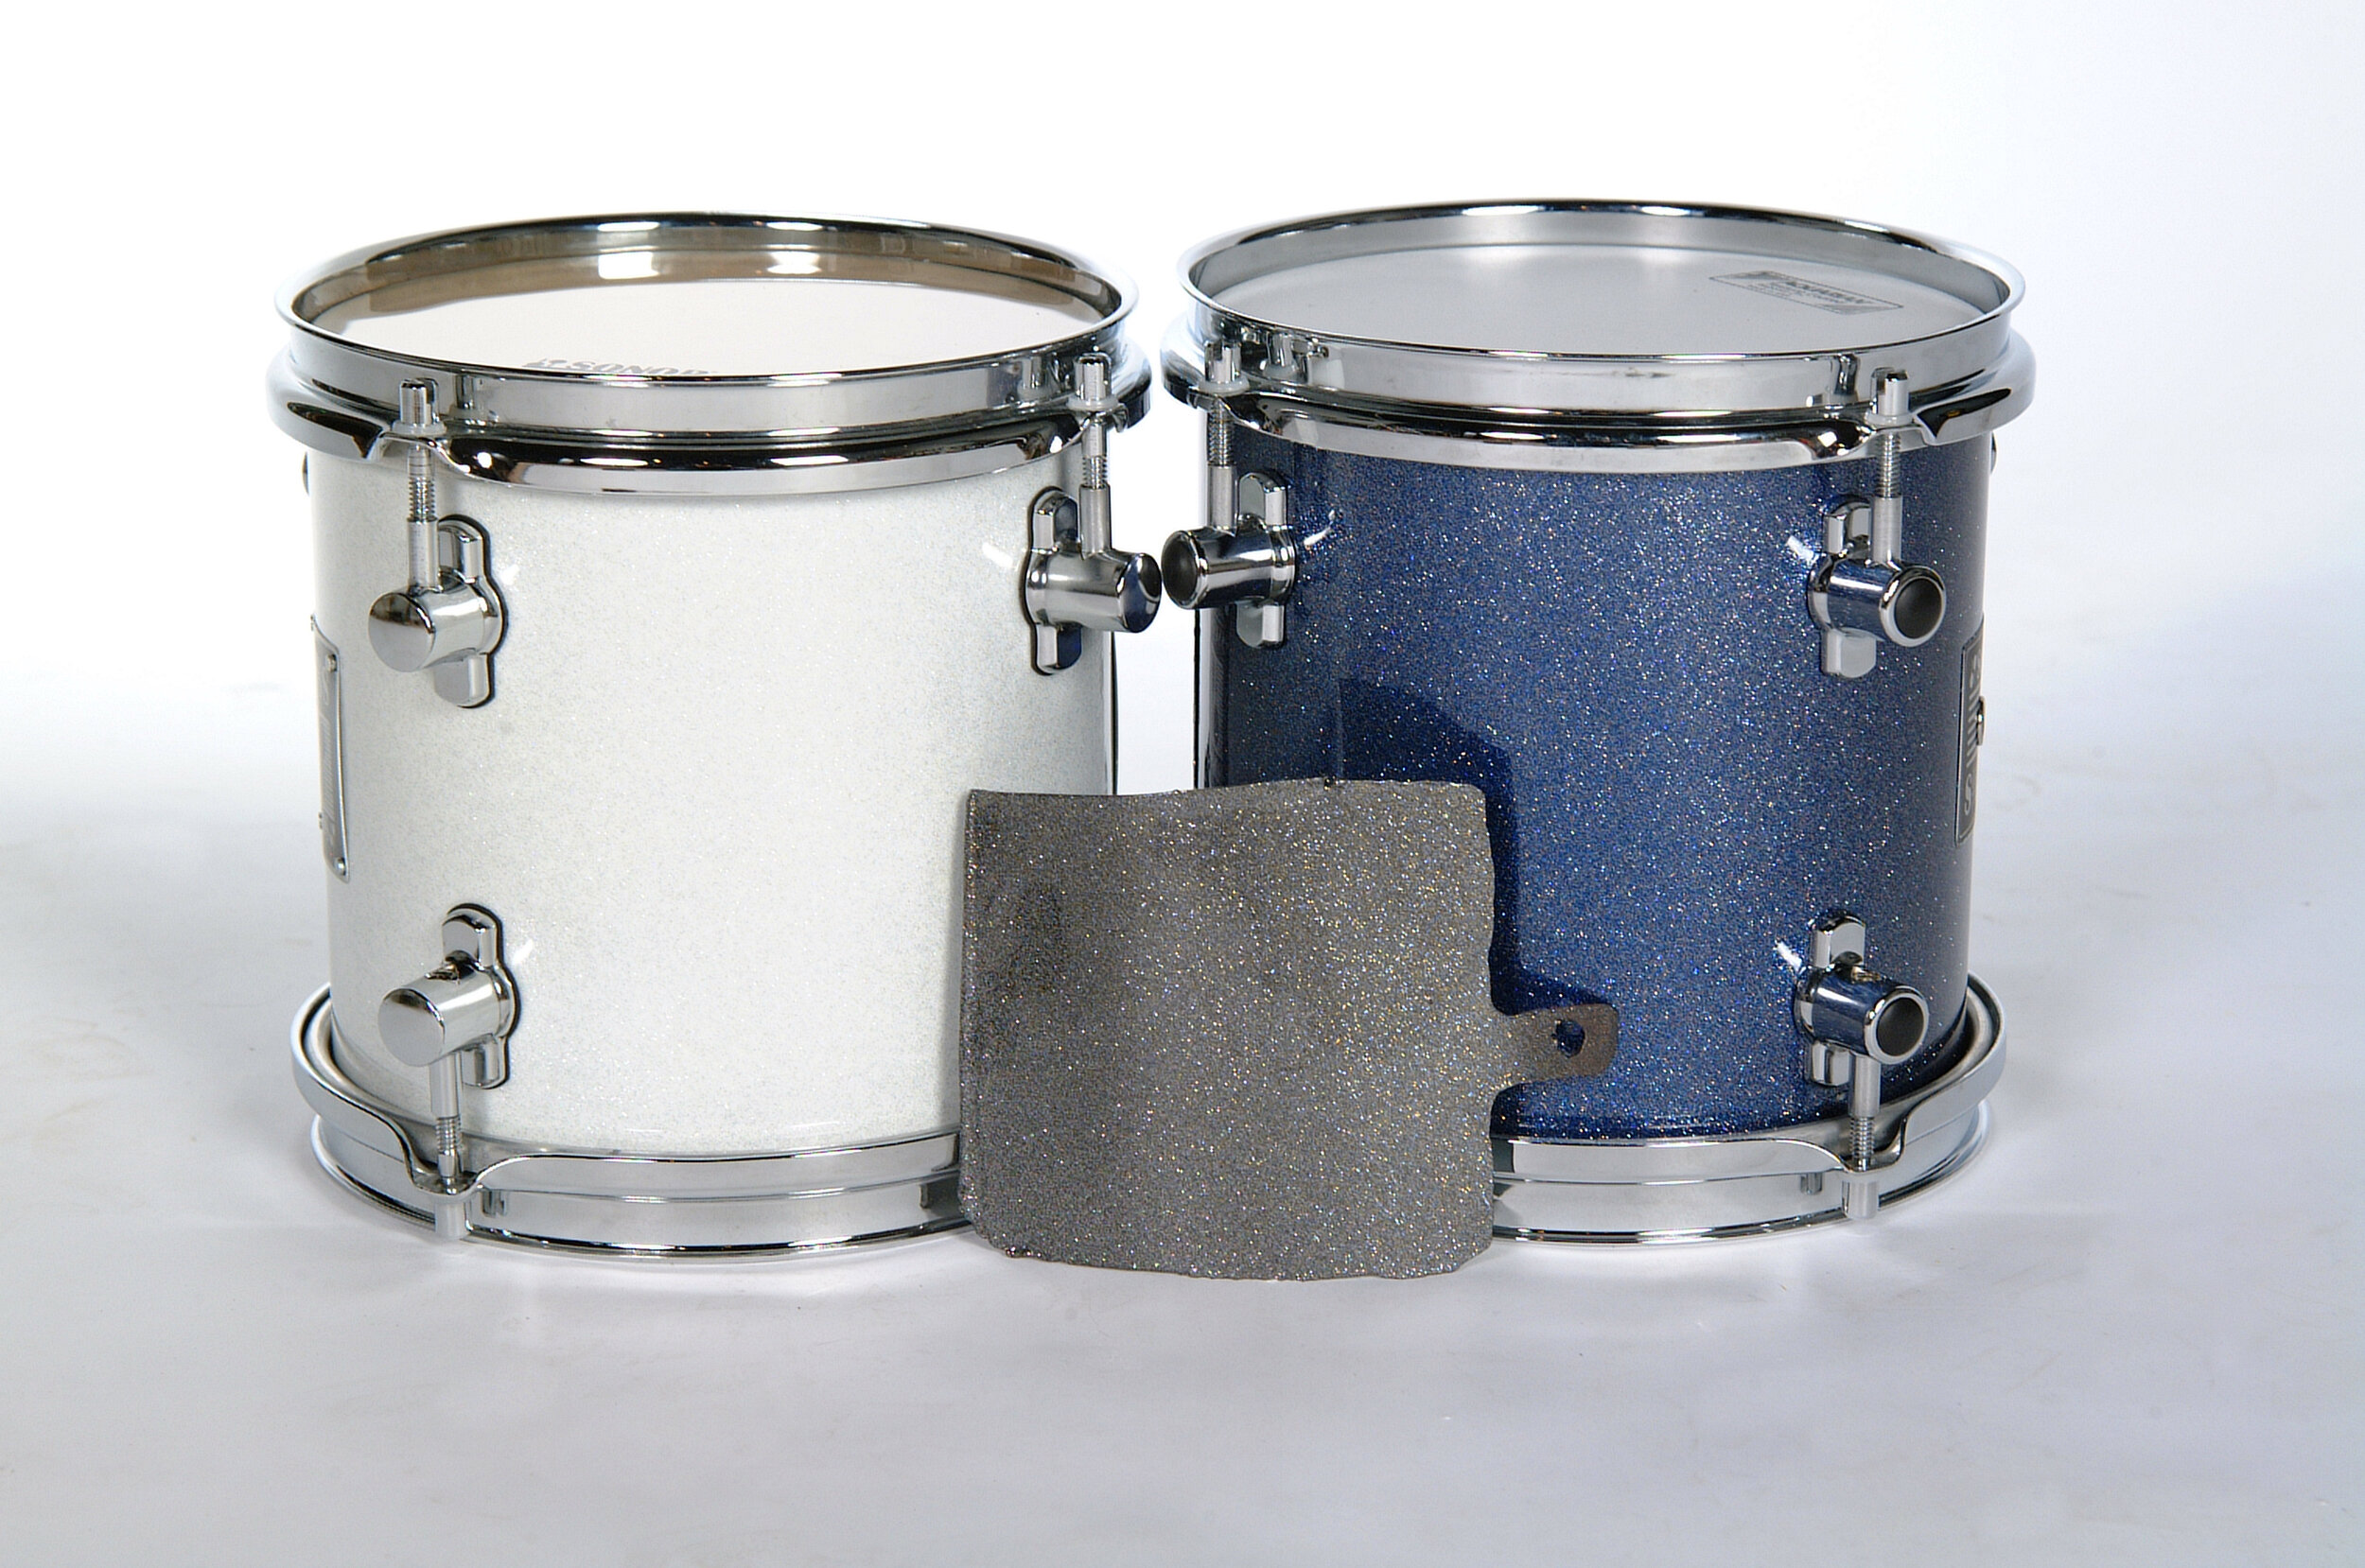 Lawrence Drums catalog pictures 0106 017.jpg